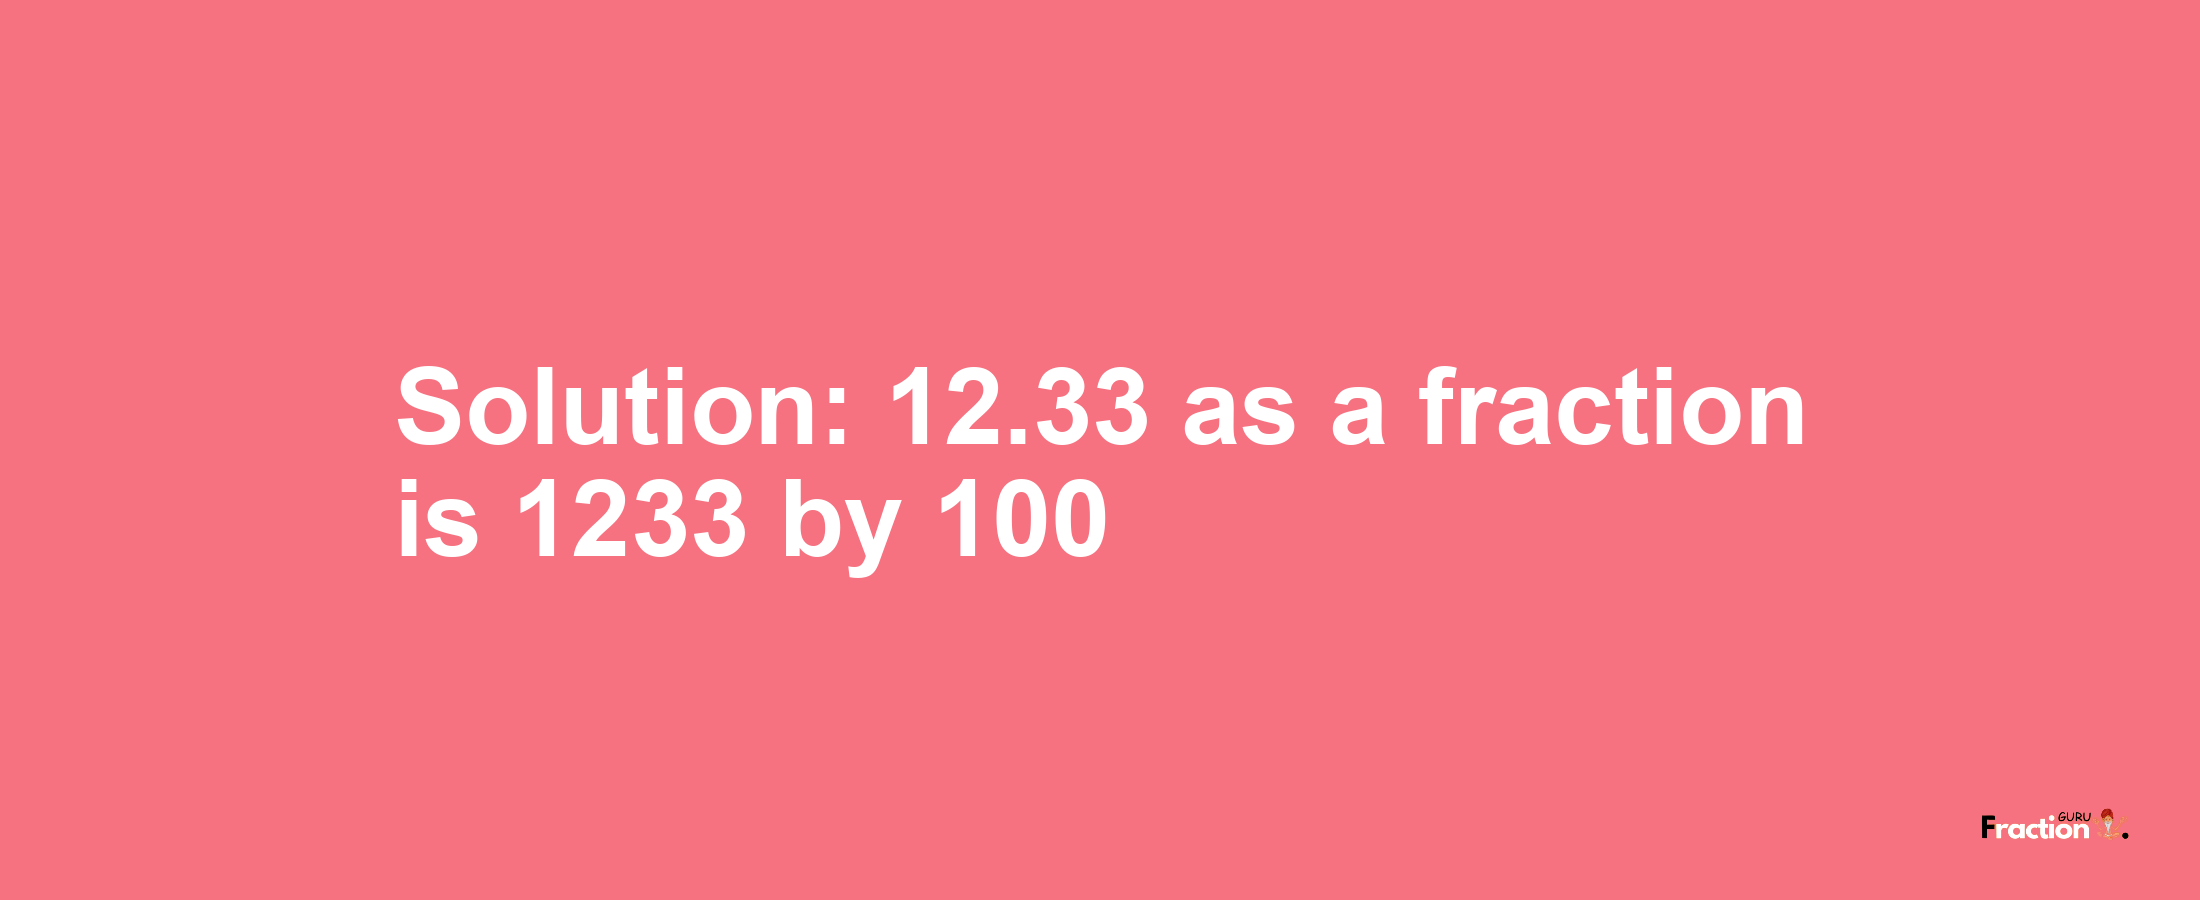 Solution:12.33 as a fraction is 1233/100